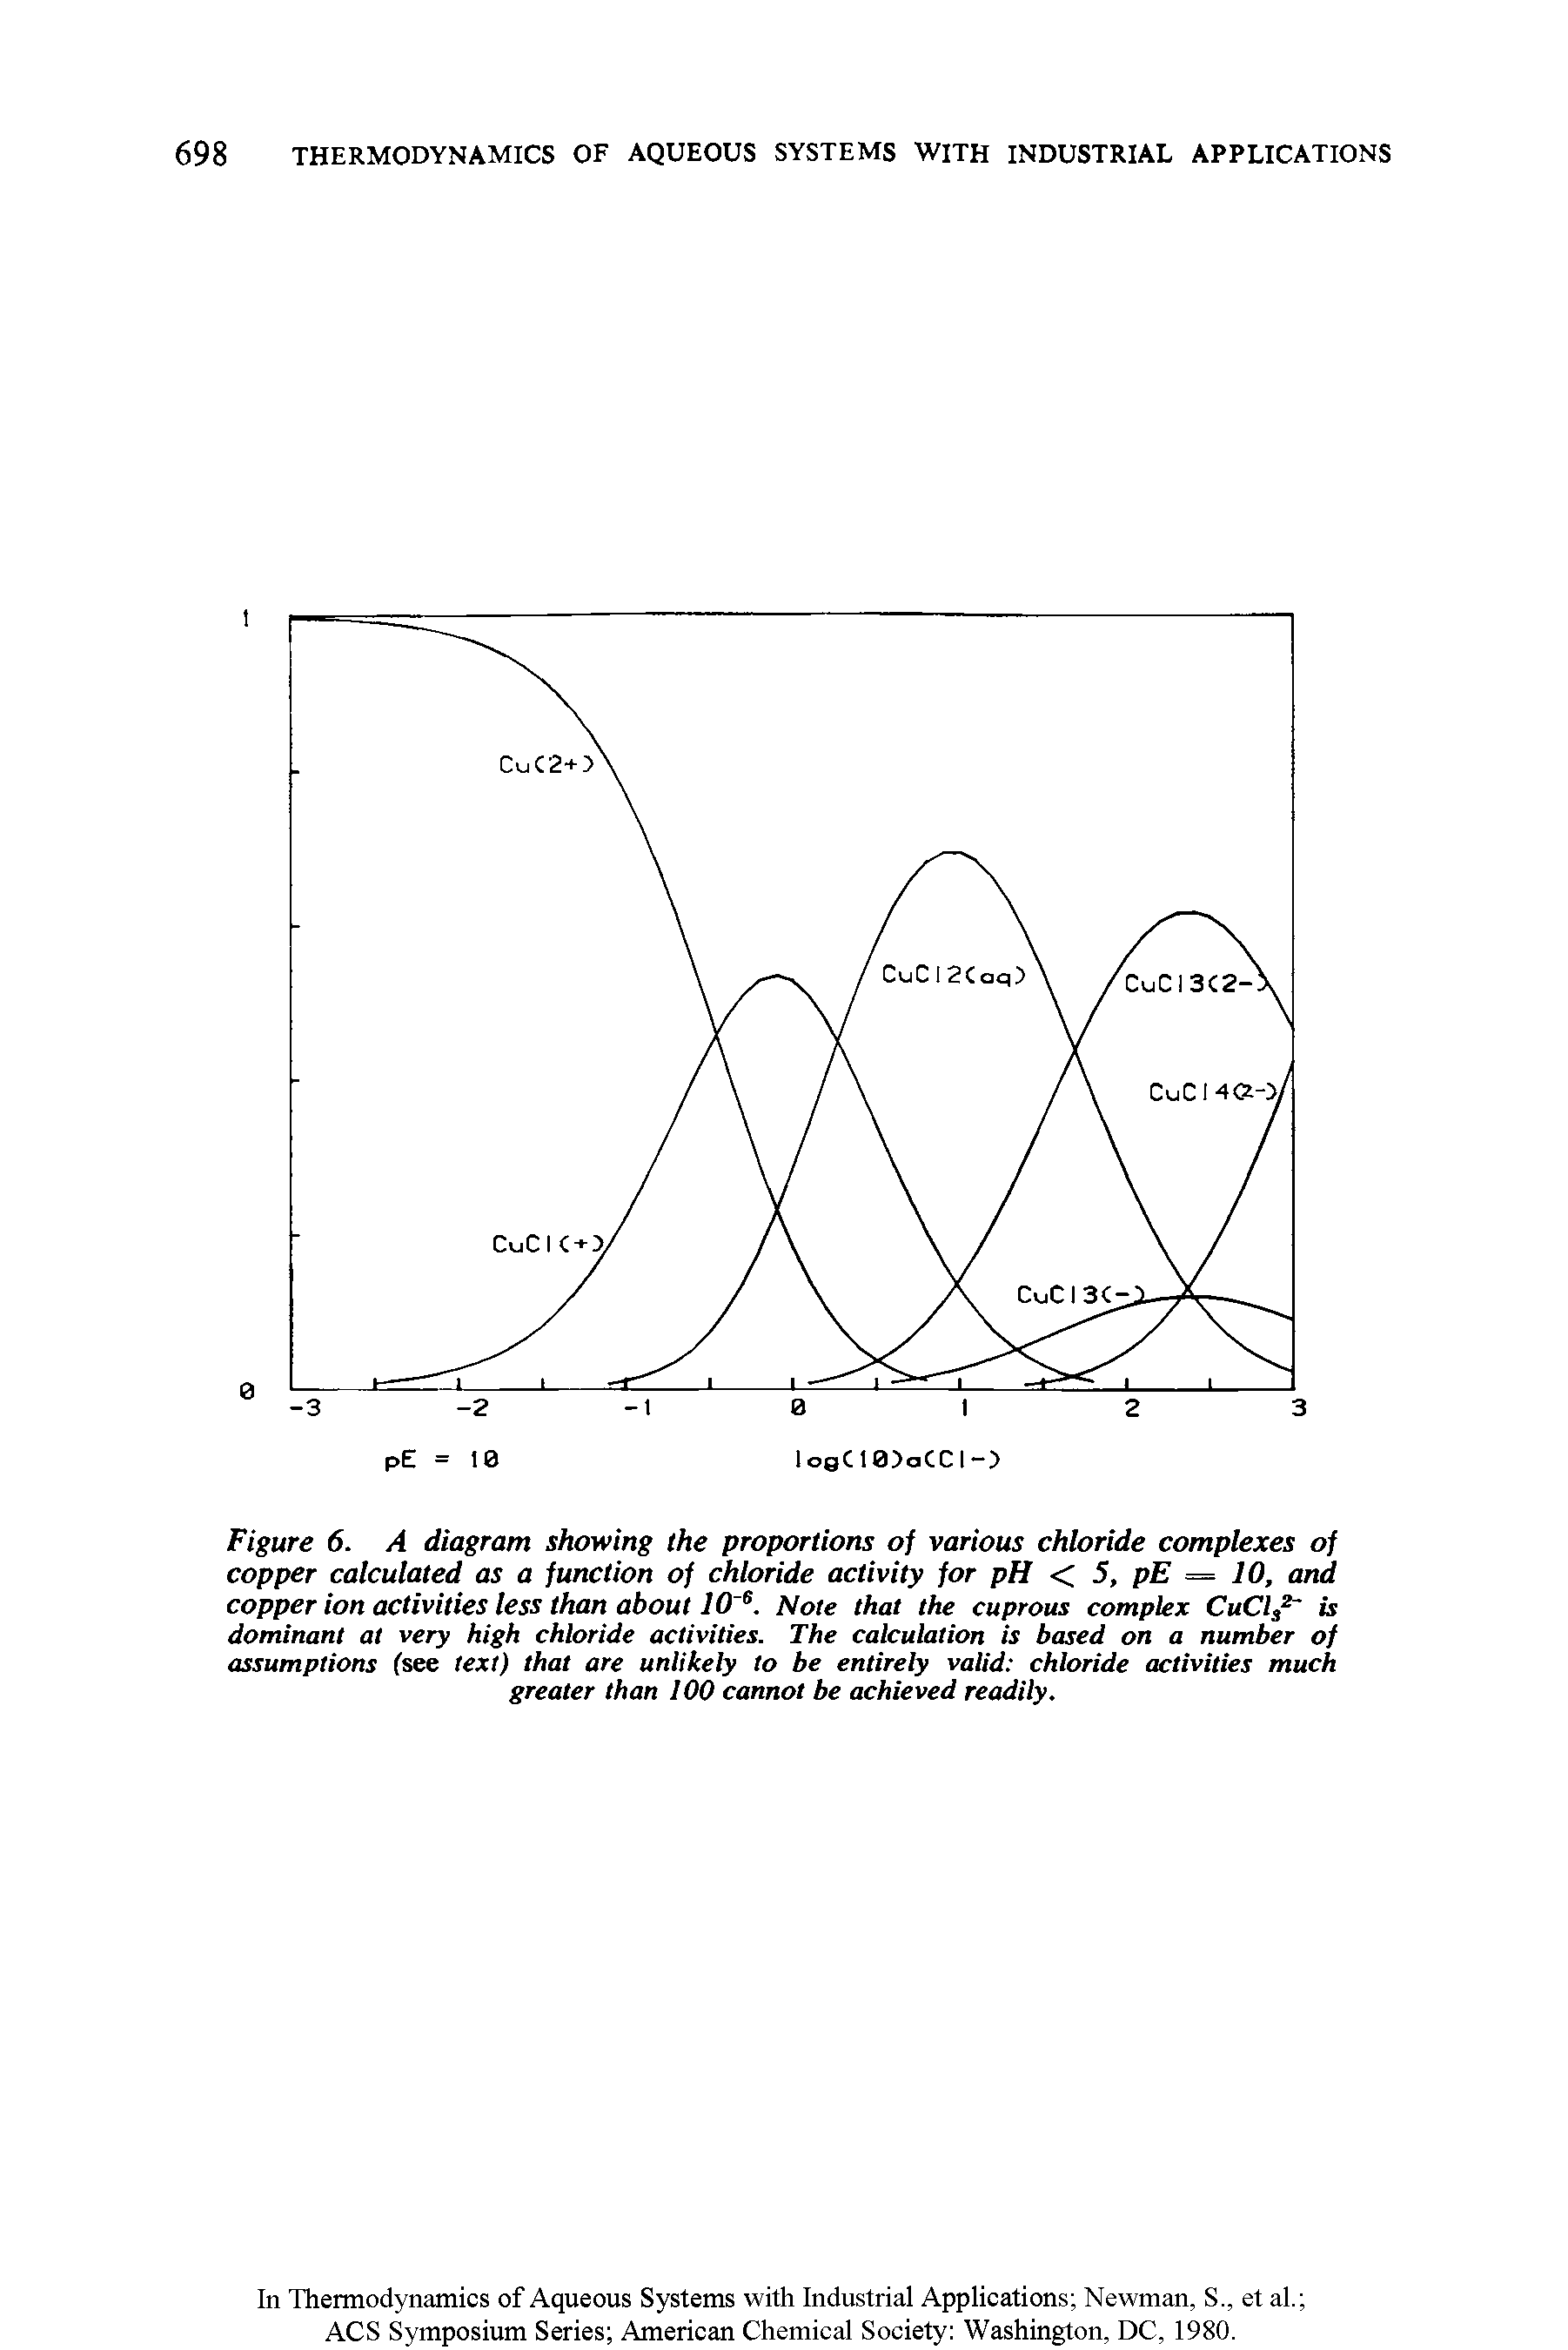 Figure 6. A diagram showing the proportions of various chloride complexes of copper calculated as a function of chloride activity for pH < 5, pE = 10, and copper ion activities less than about 10 6. Note that the cuprous complex CuCl32 is dominant at very high chloride activities. The calculation is based on a number of assumptions (see text) that are unlikely to be entirely valid chloride activities much greater than 100 cannot be achieved readily.